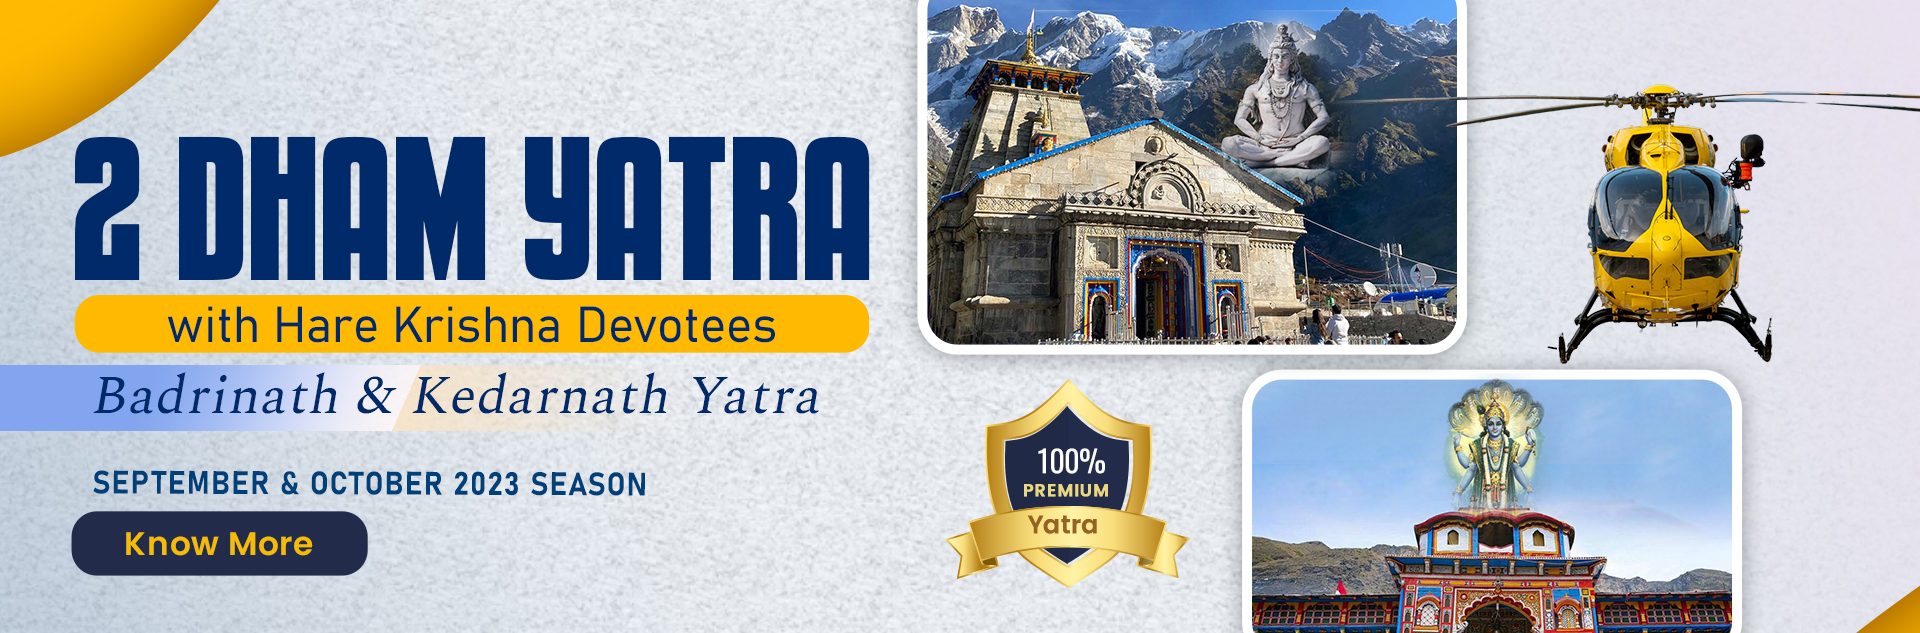 Hare Krishna Golden Temple - Join the exclusive Char Dham Yatra by